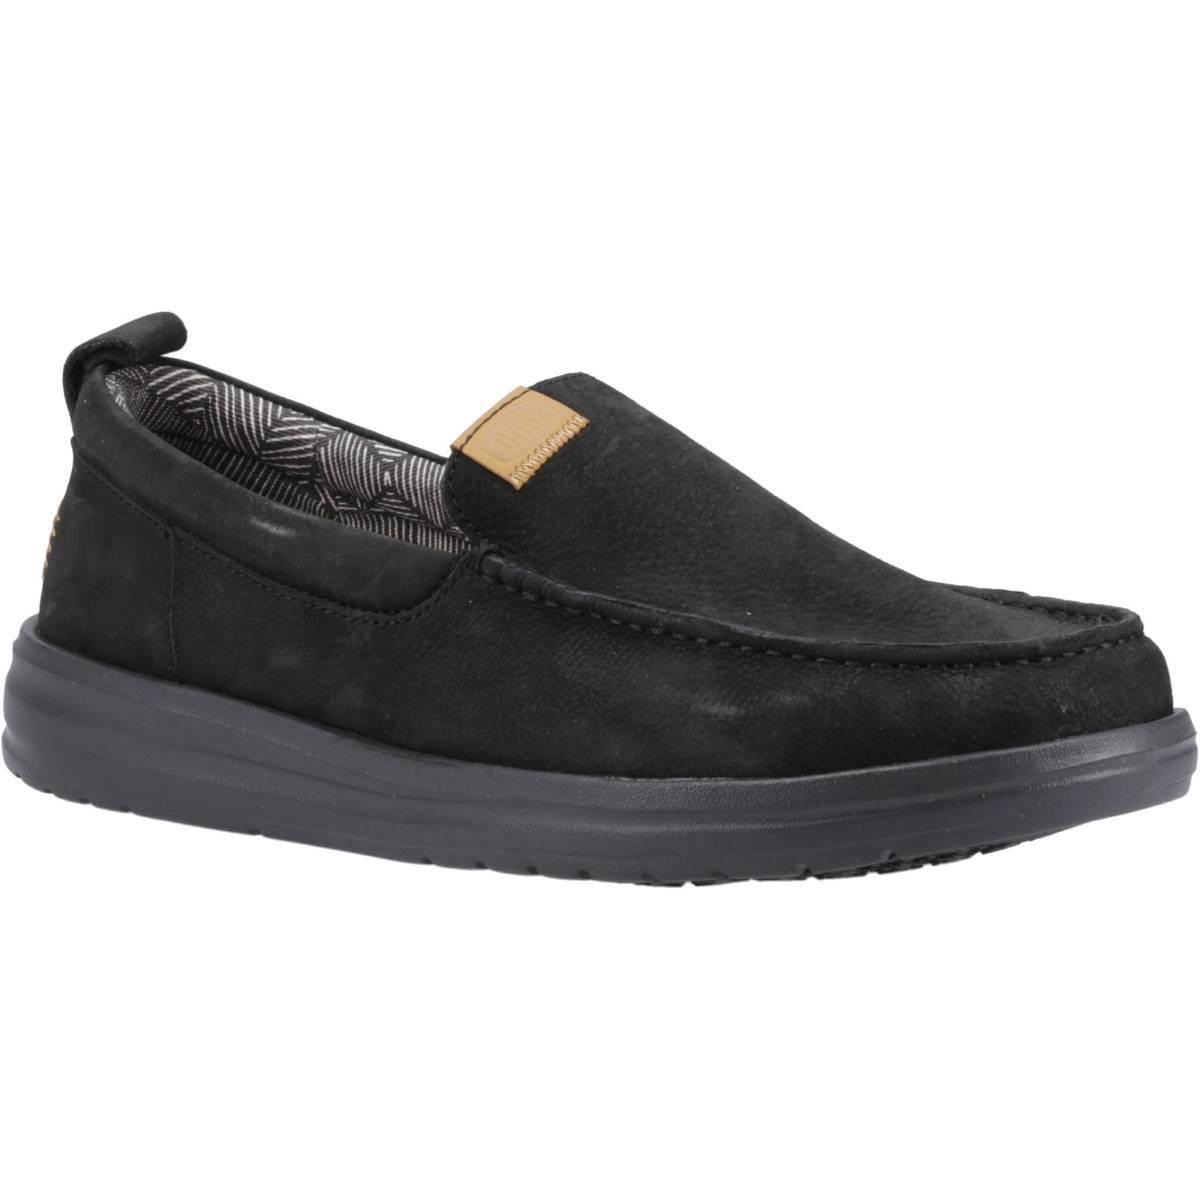 Hey Dude Wally Grip Moc Craft Leather Black Mens Slip-on Shoes 40173-001 in a Plain  in Size 7